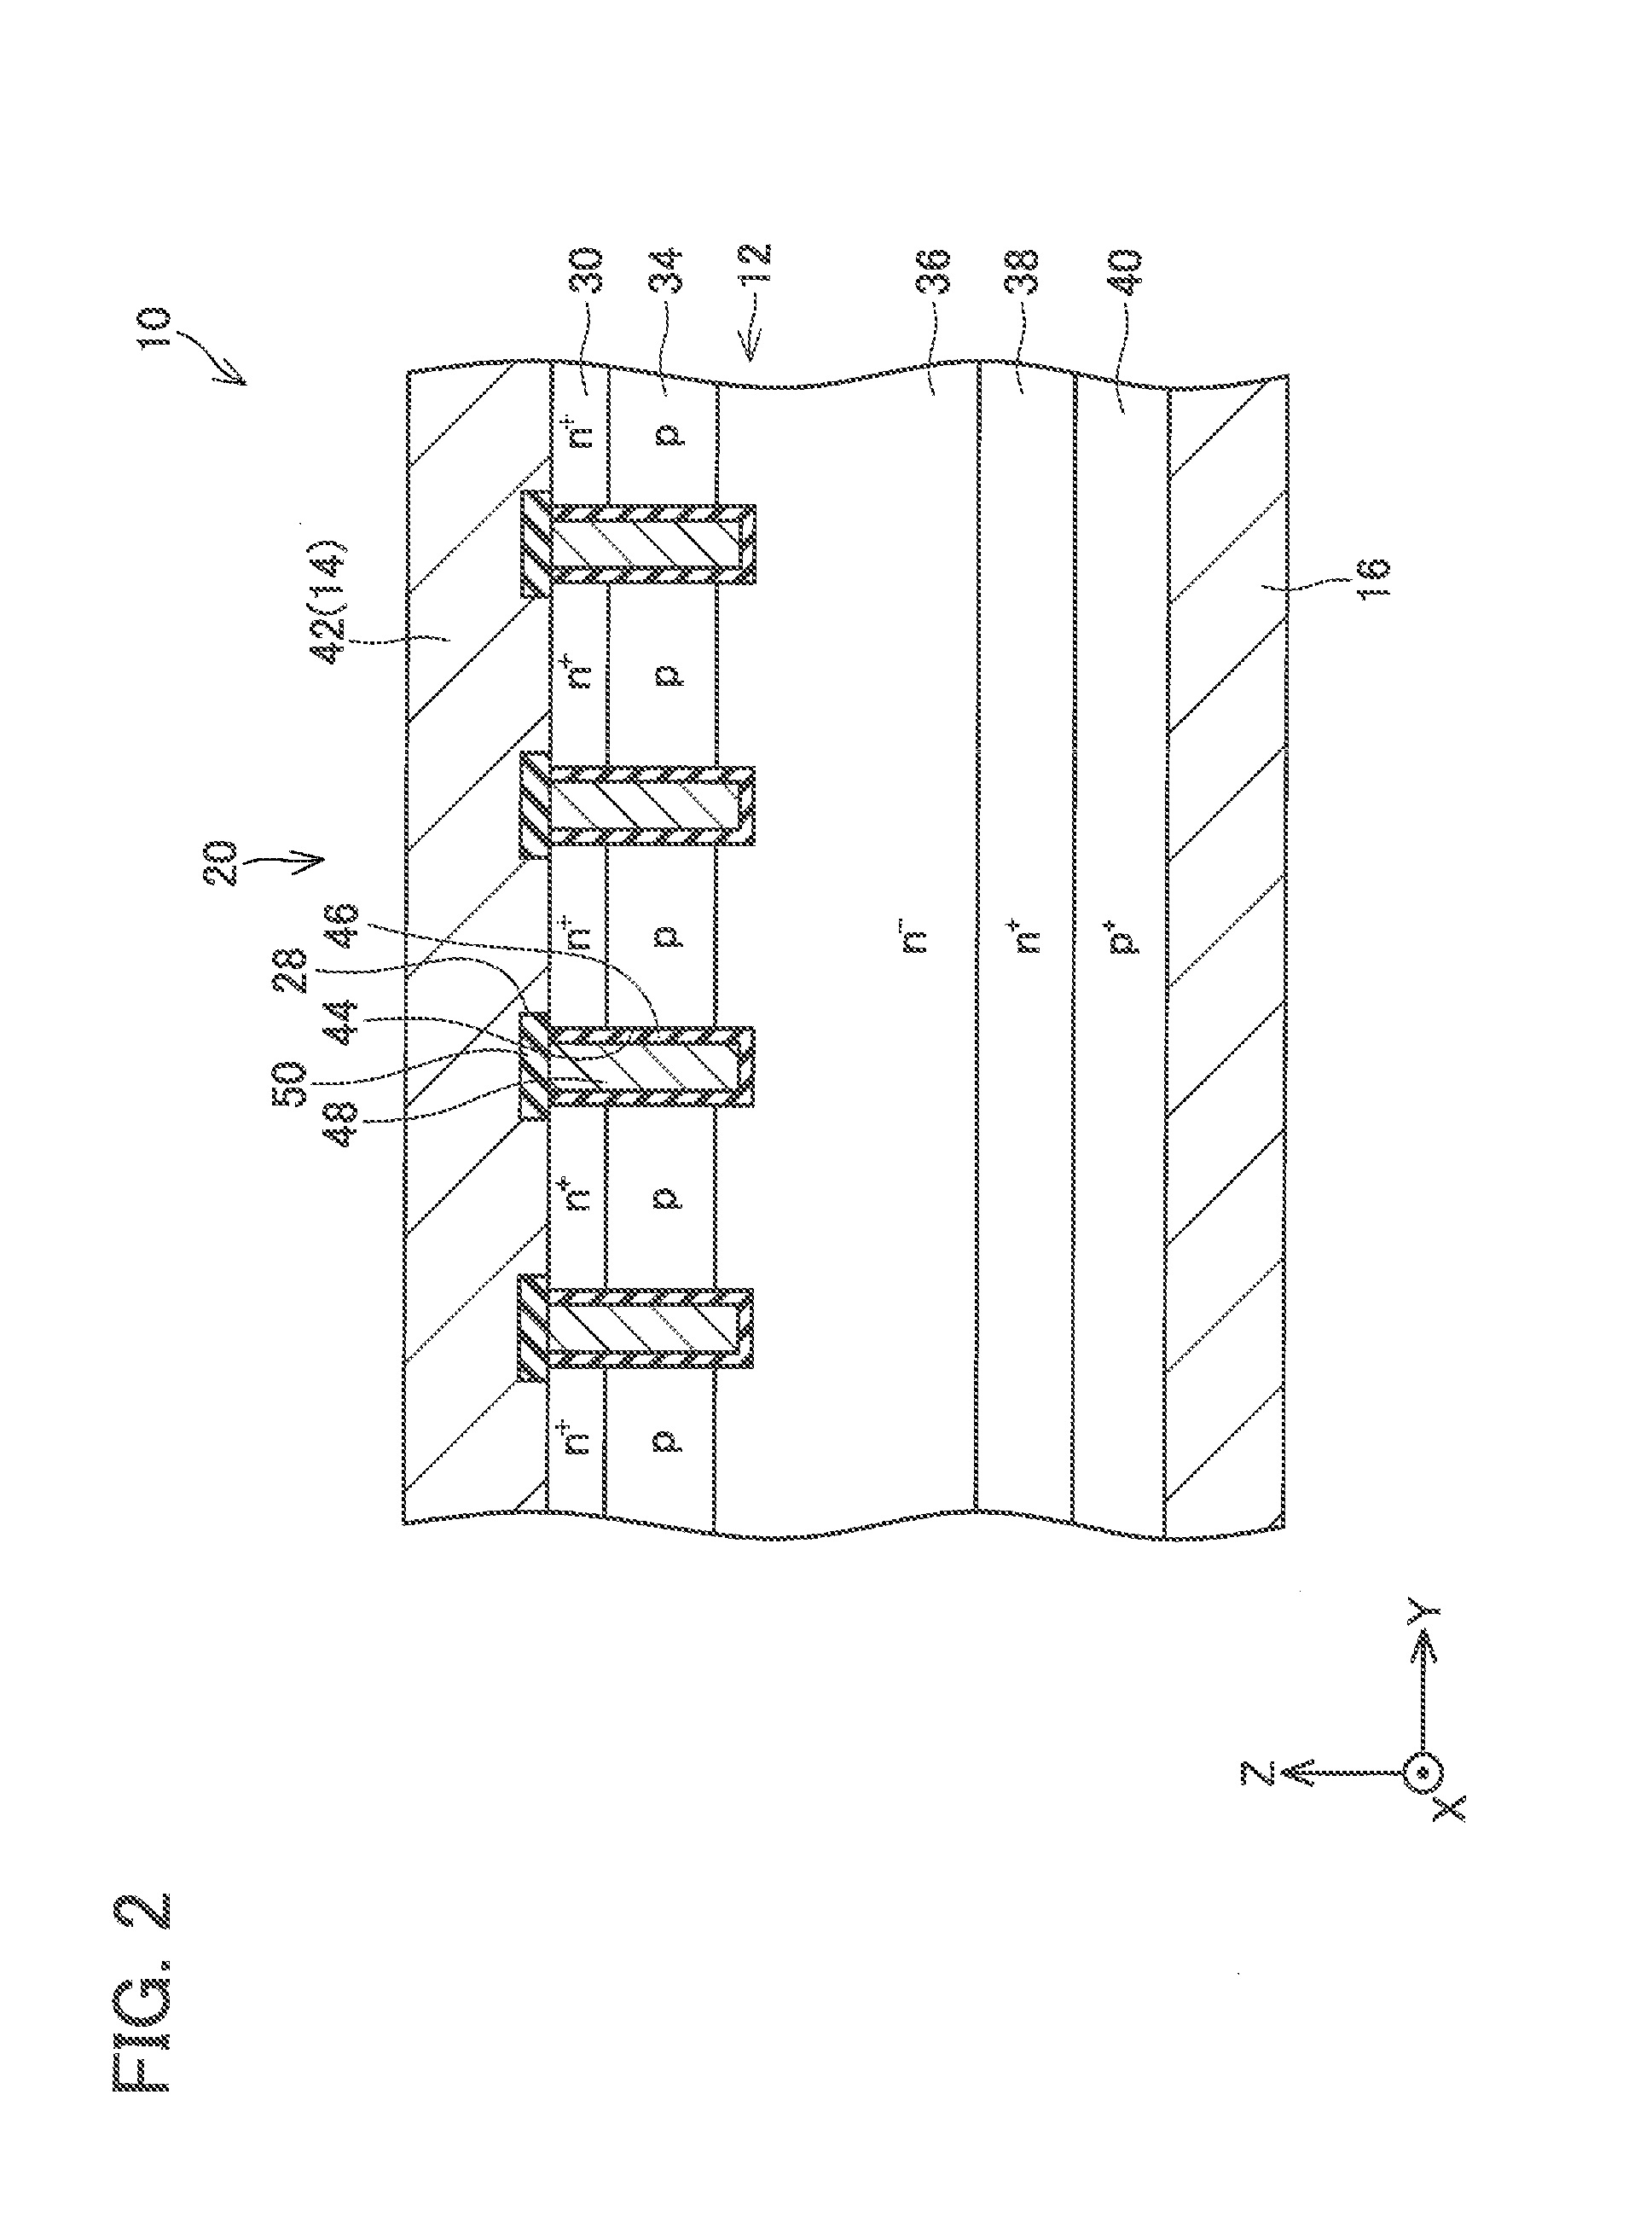 A semiconductor device comprising a main region, a current sense region, and a well region